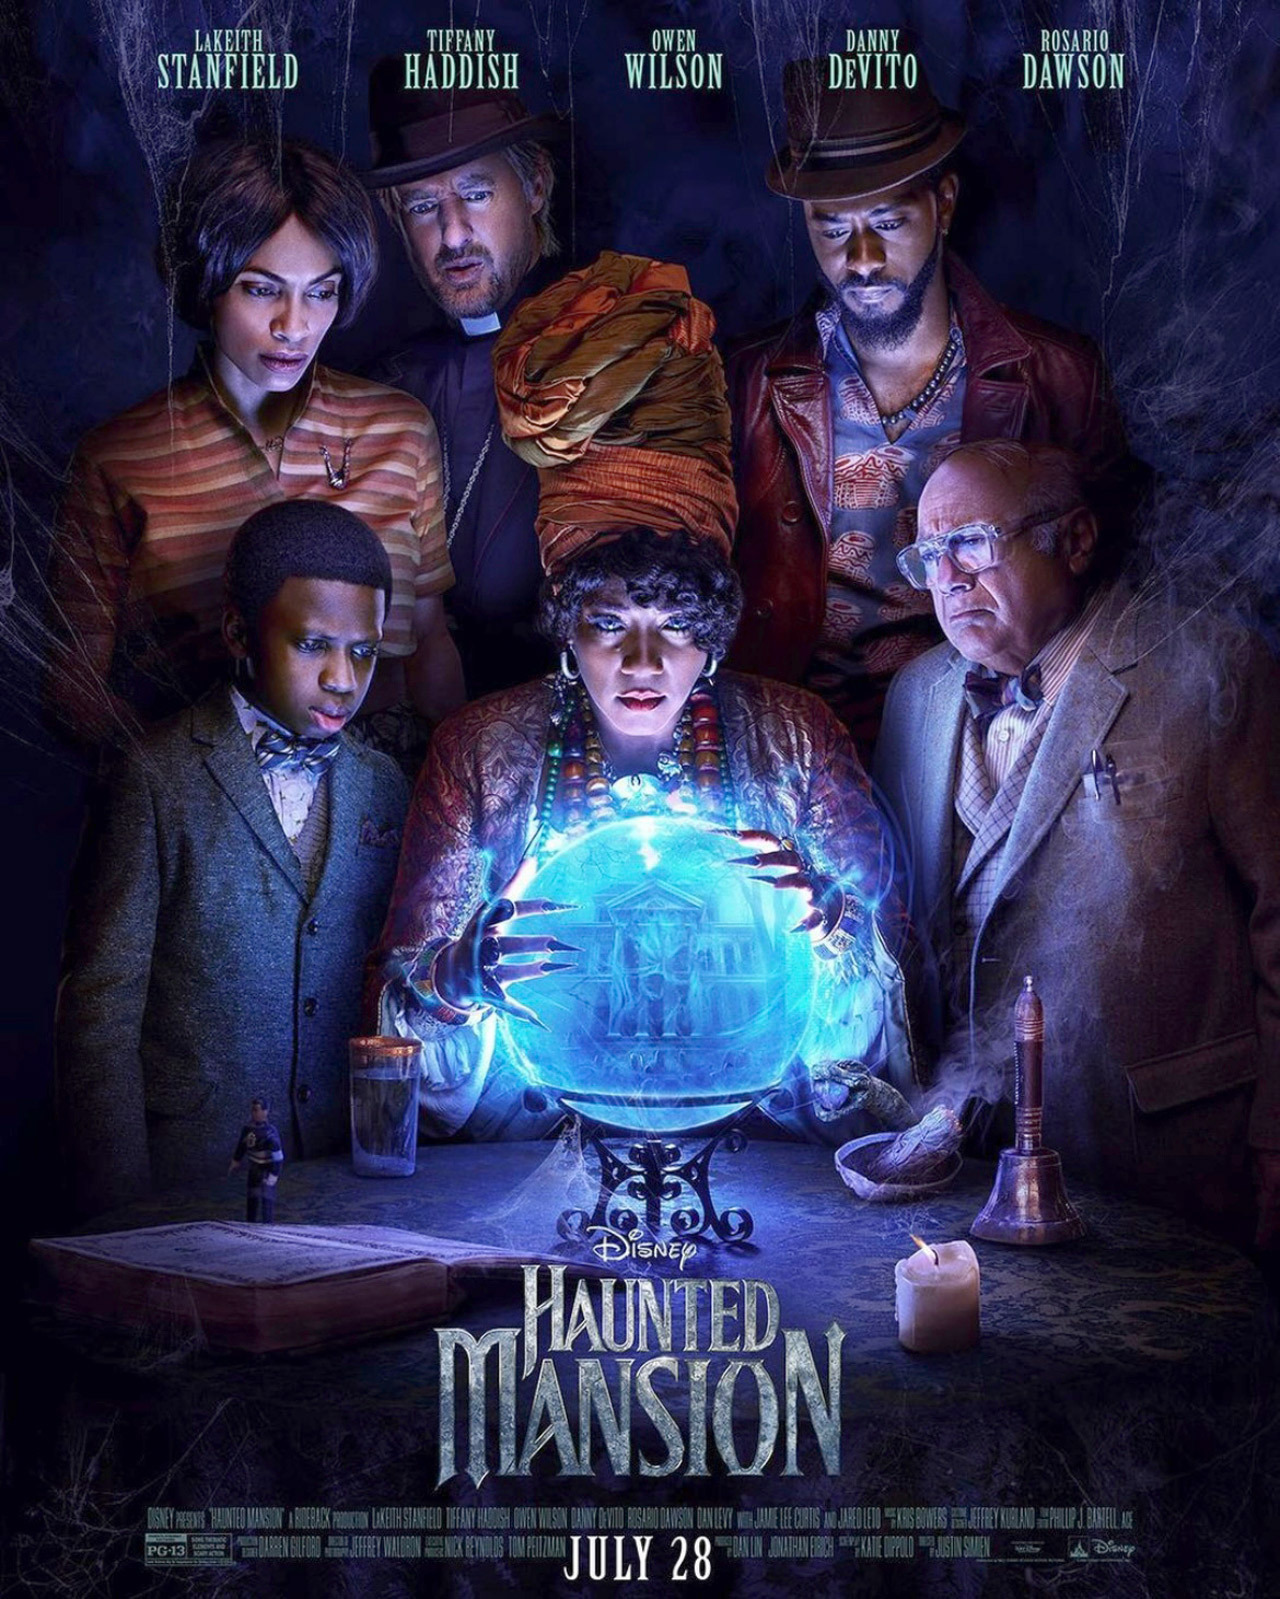 Haunted Mansion Trailer Lakeith Stanfield Tiffany Haddish And Owen Wilson Star In The 